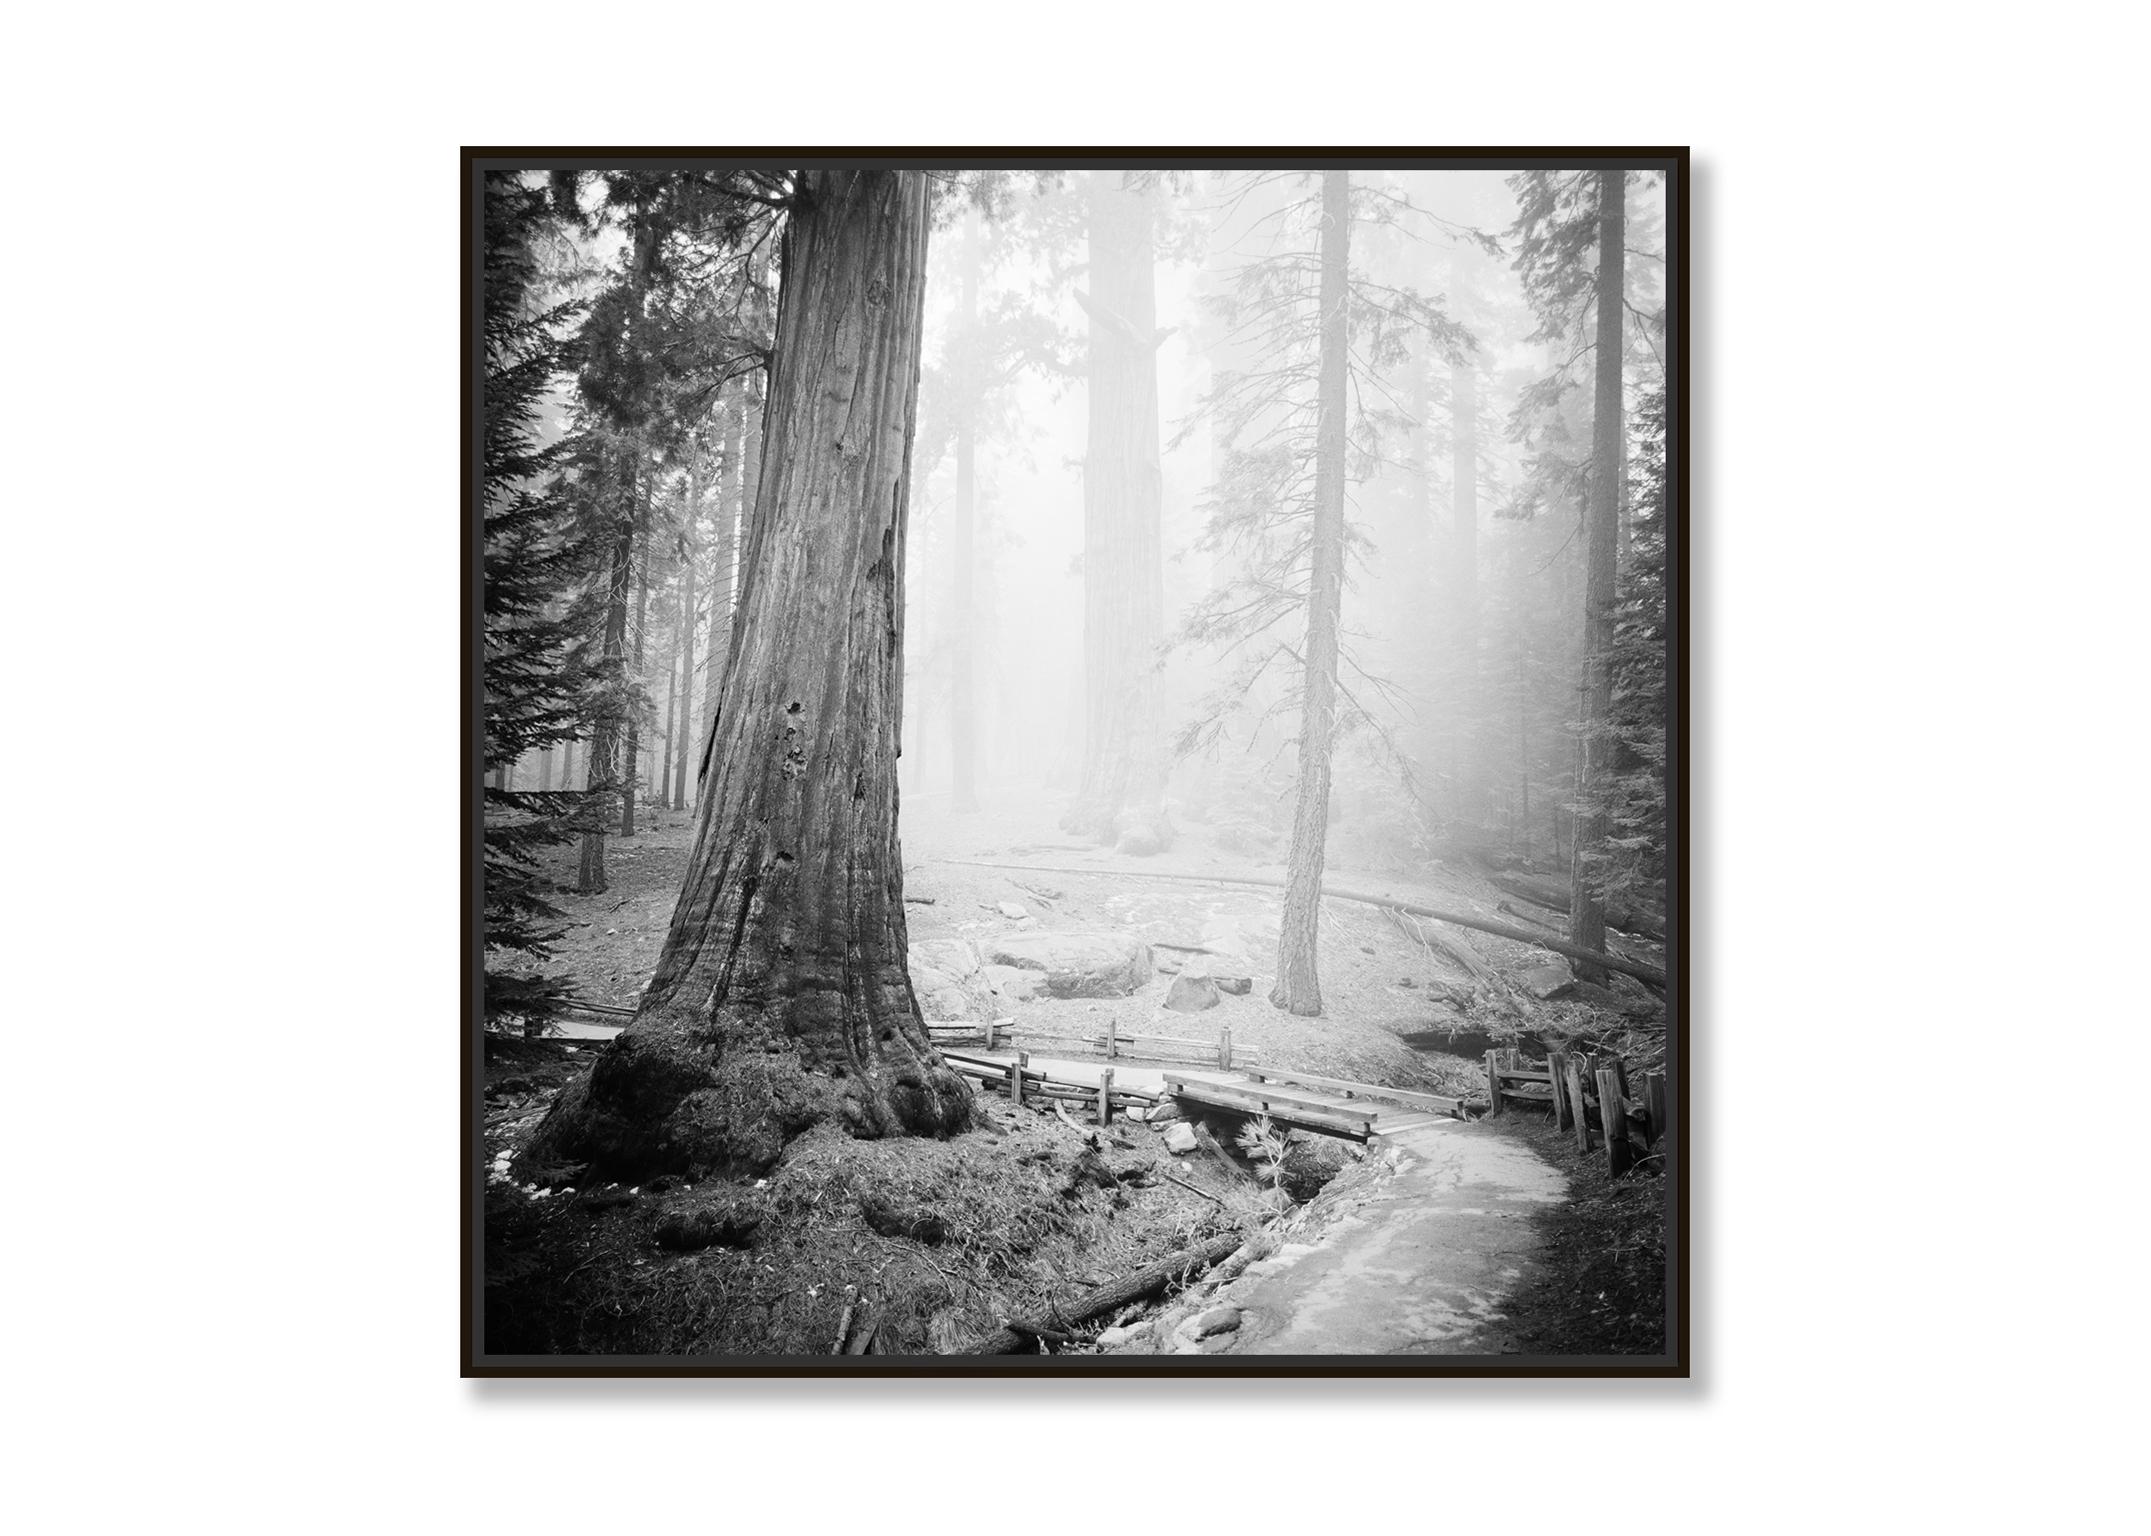 Redwood, National and State Parks, California, black and white art photography - Photograph by Gerald Berghammer